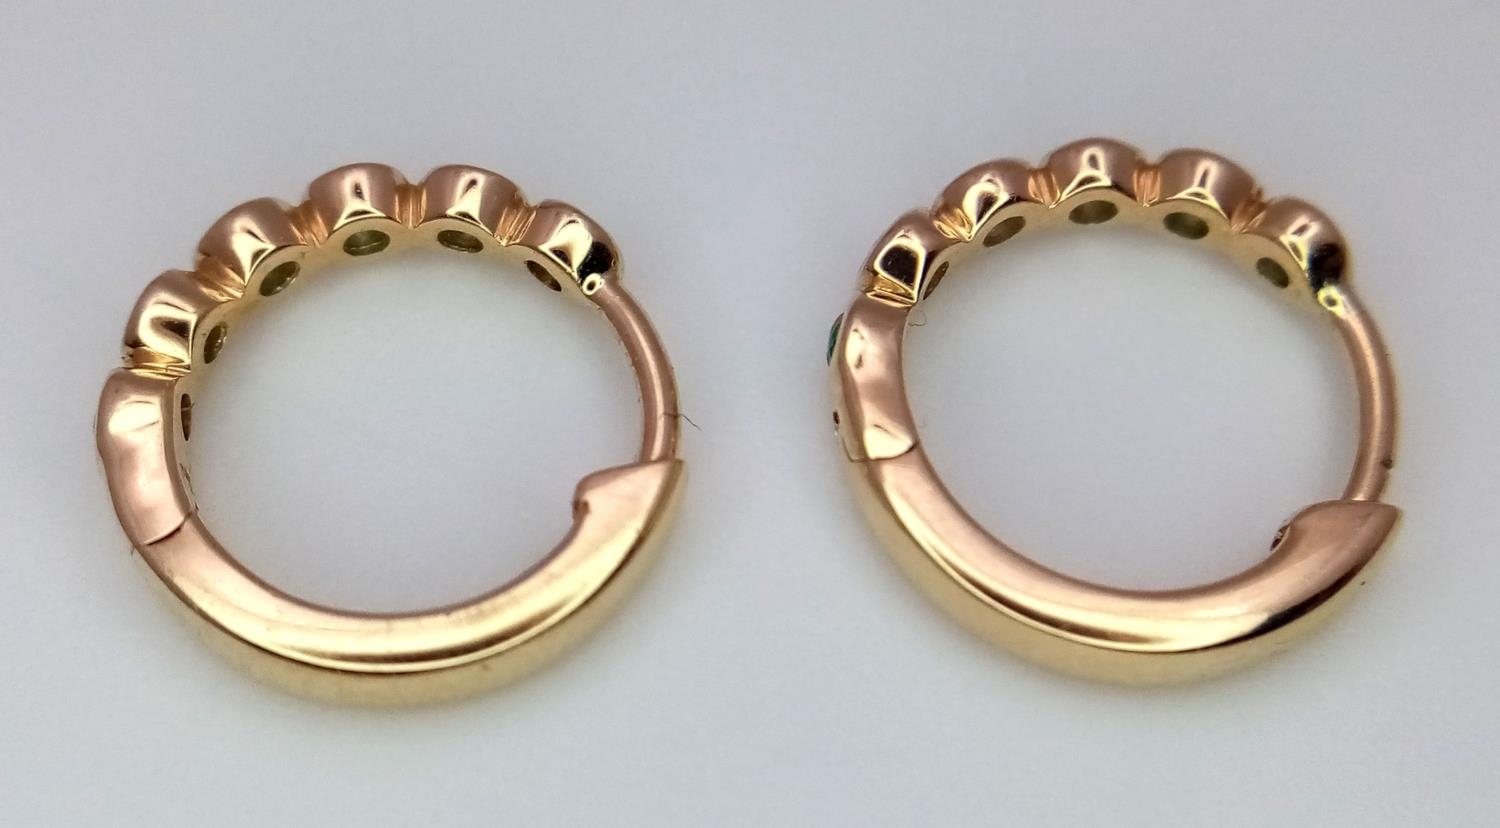 A Pair of Messika 14K Gold Small Emerald Hoop Earrings. 1.7g - Image 2 of 3